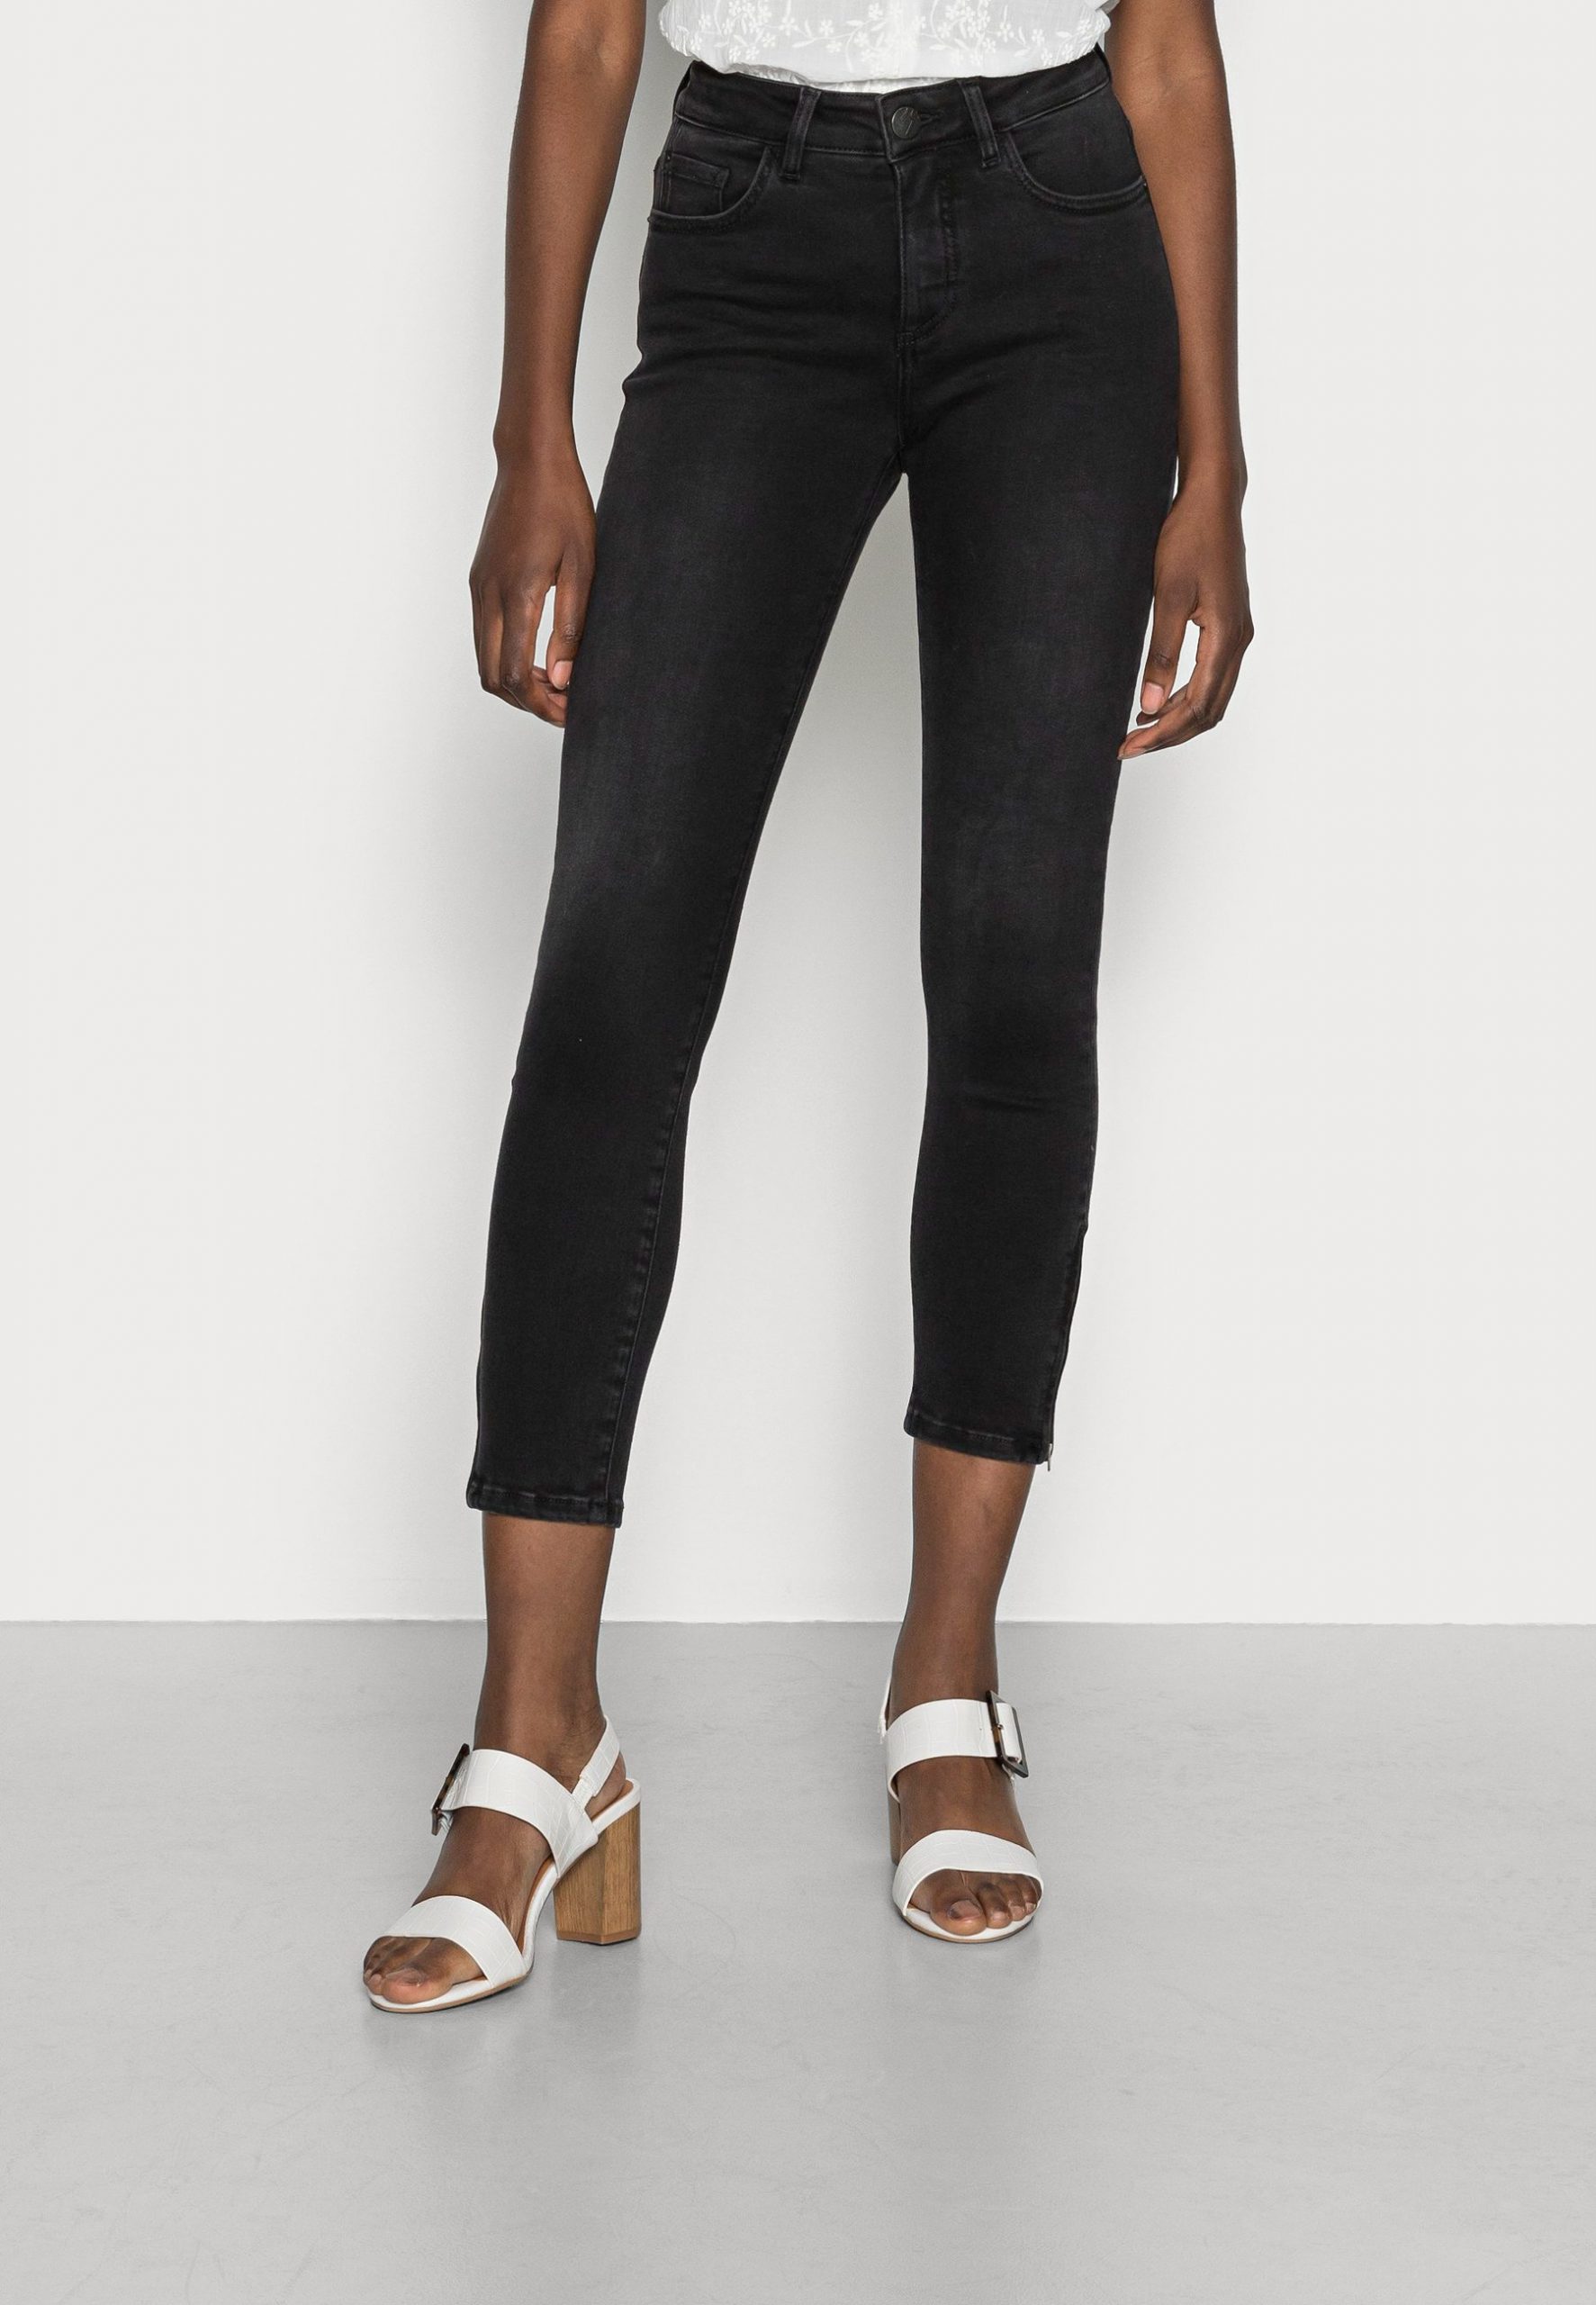 servitrice Sydøst Avl Authentique opening sales - Opus Excellent EVITA ZIP - Jeans Skinny Fit